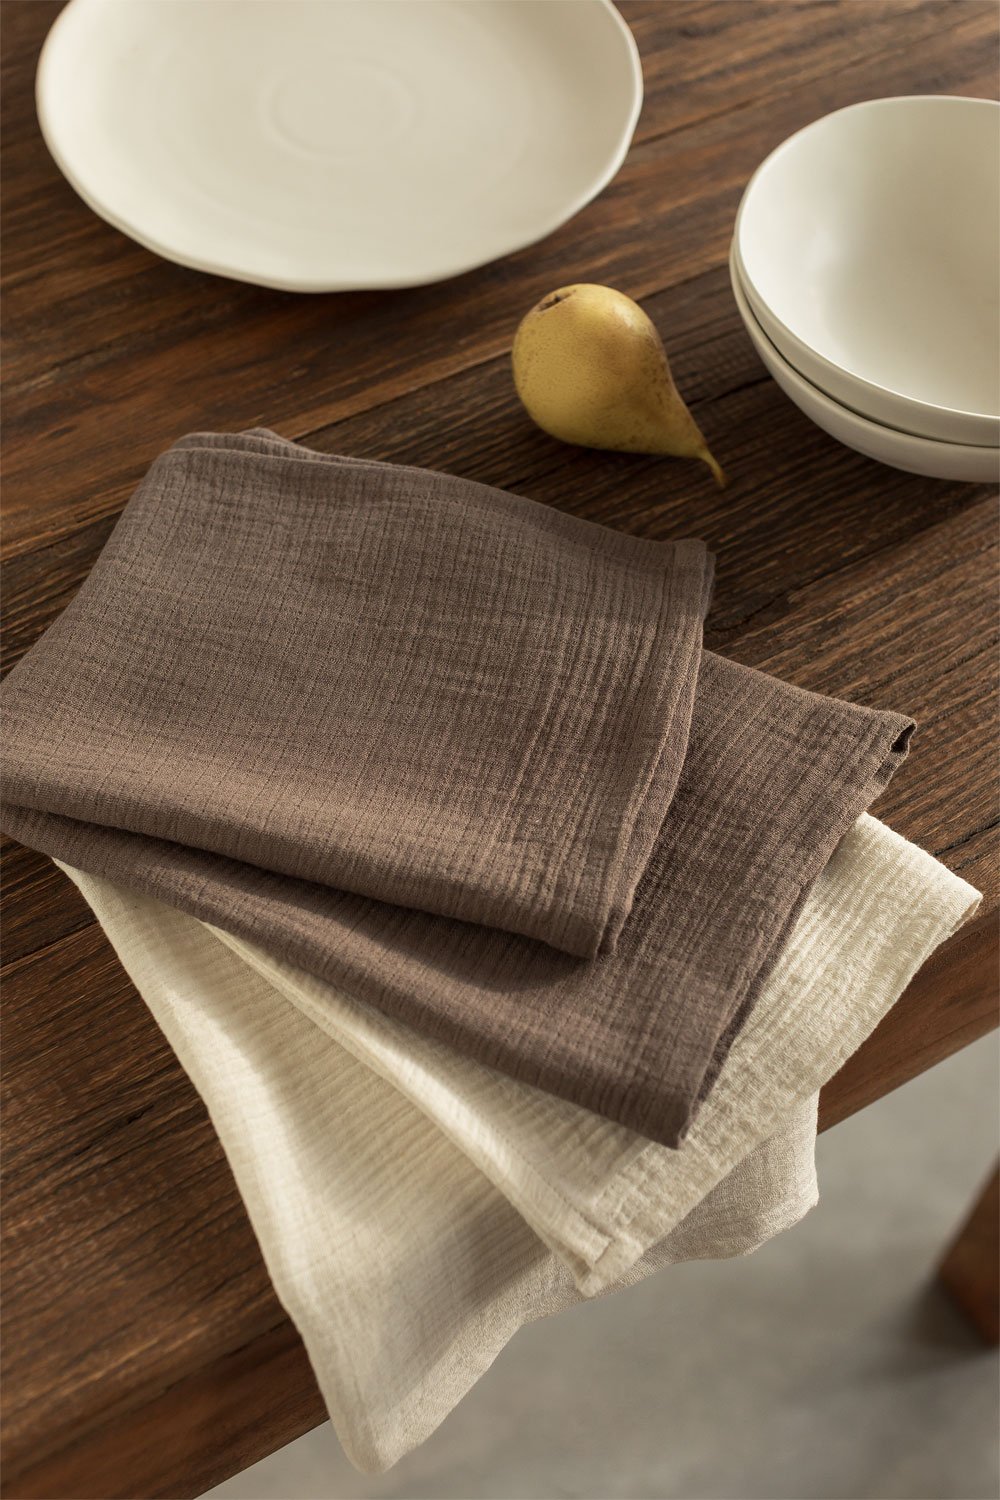 Ripert set of 2 cotton kitchen towels, gallery image 1